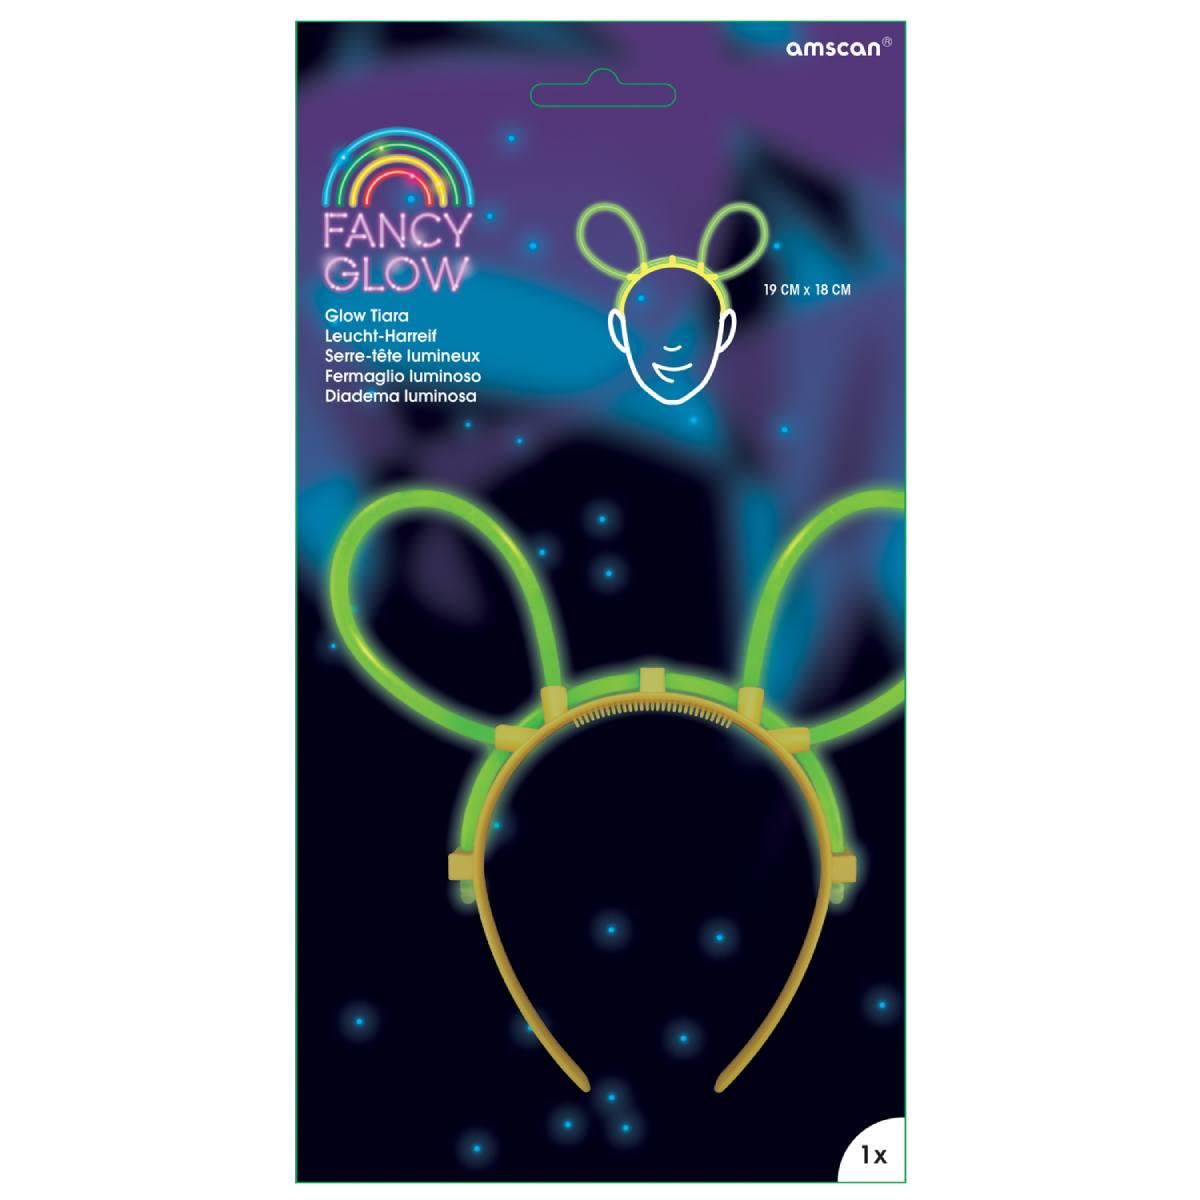 Glow Stick Mouse Tiara by Amscan 9902343 available here at Karnival Costumes online party shop